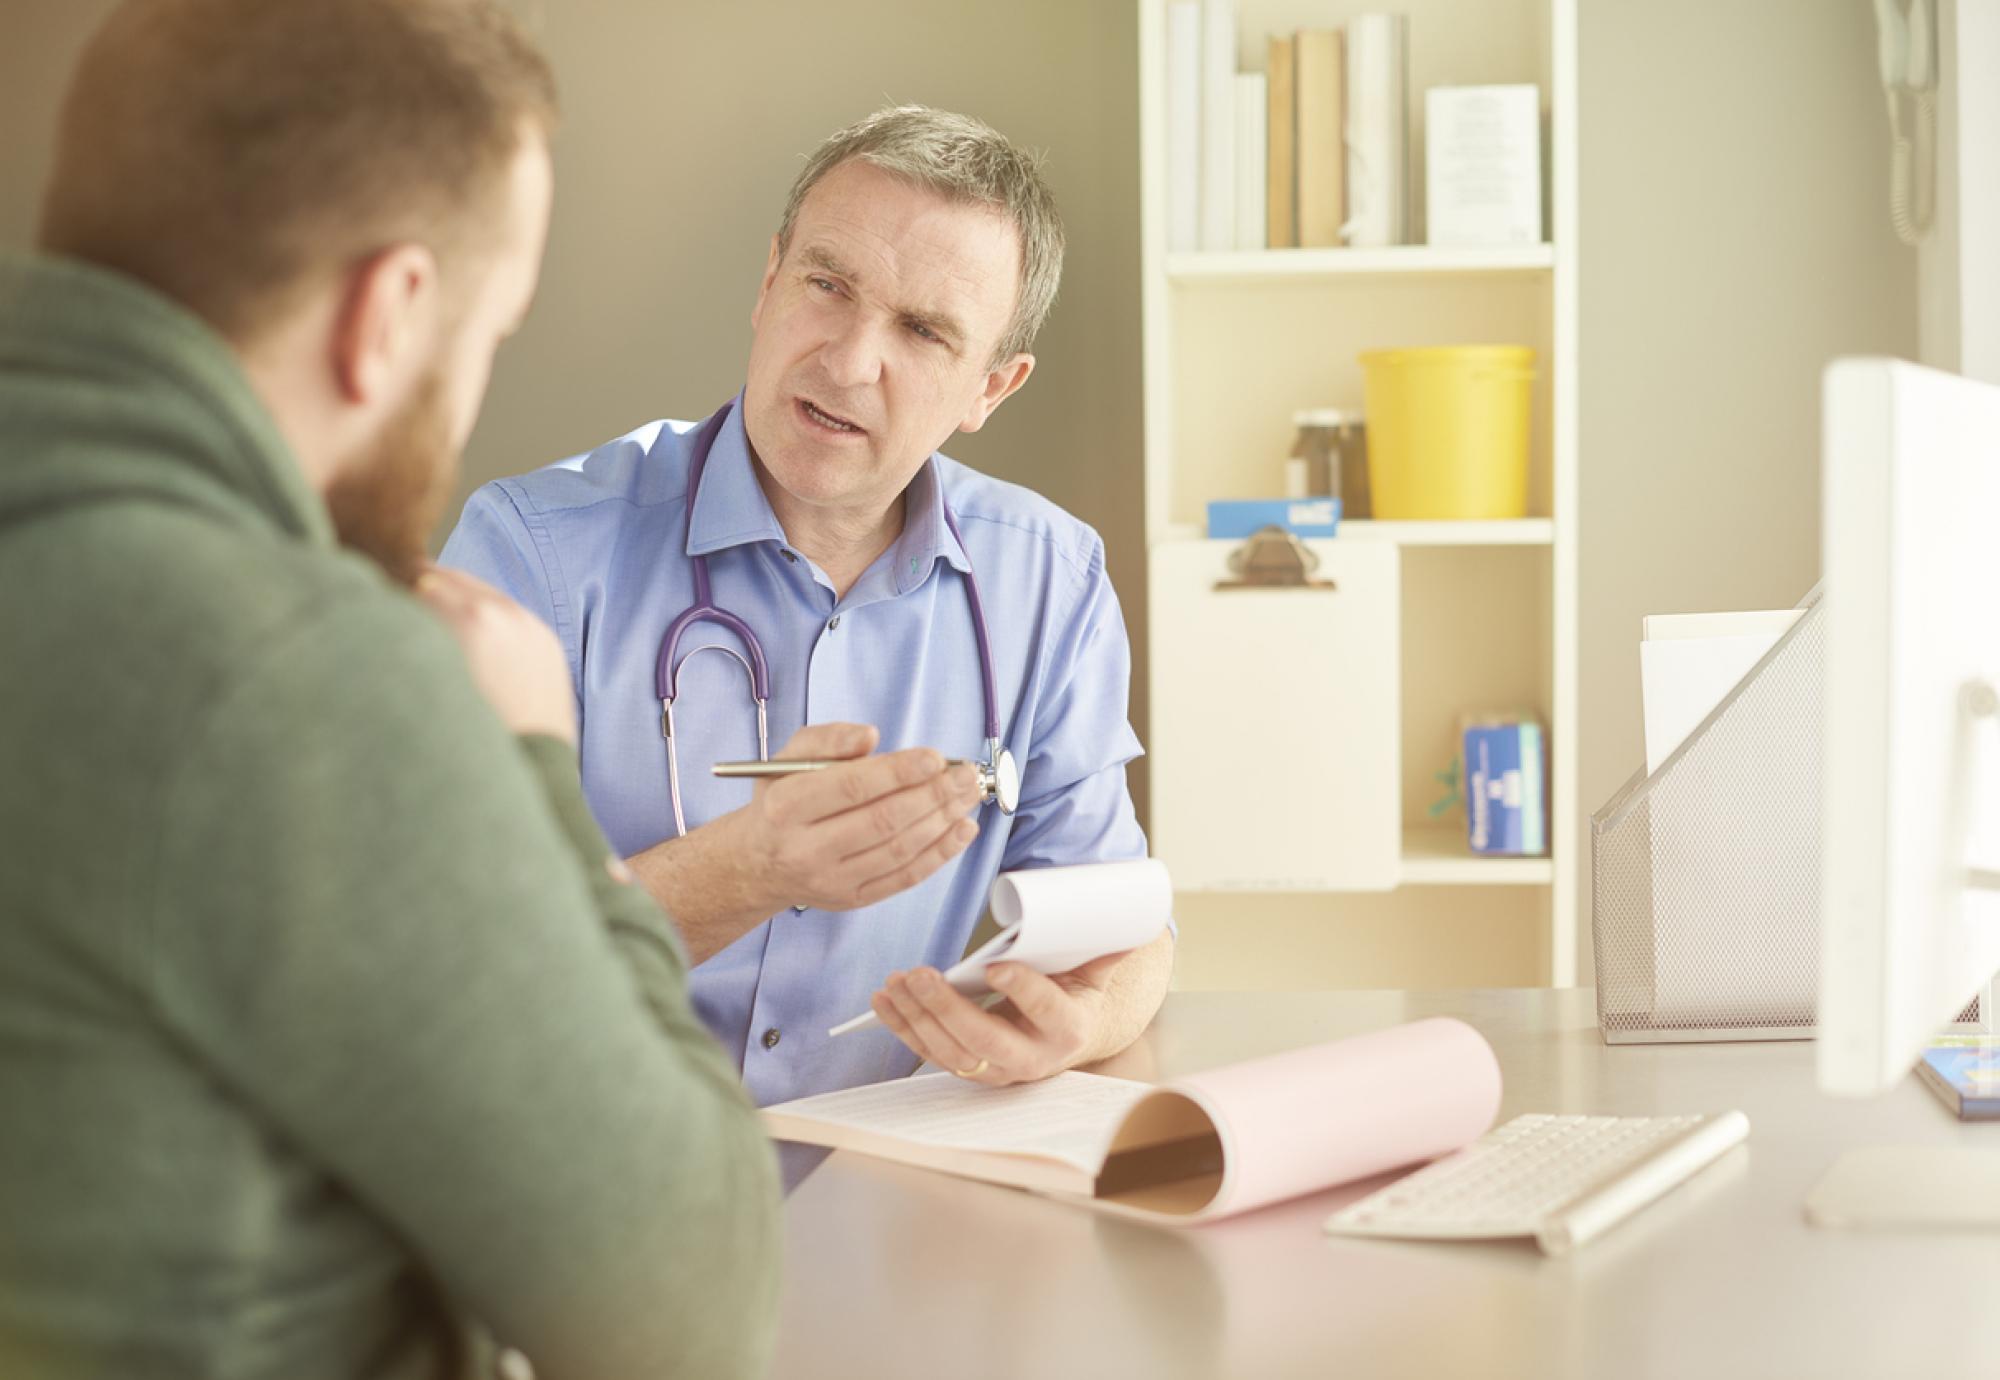 Doctor consulting man about patient safety